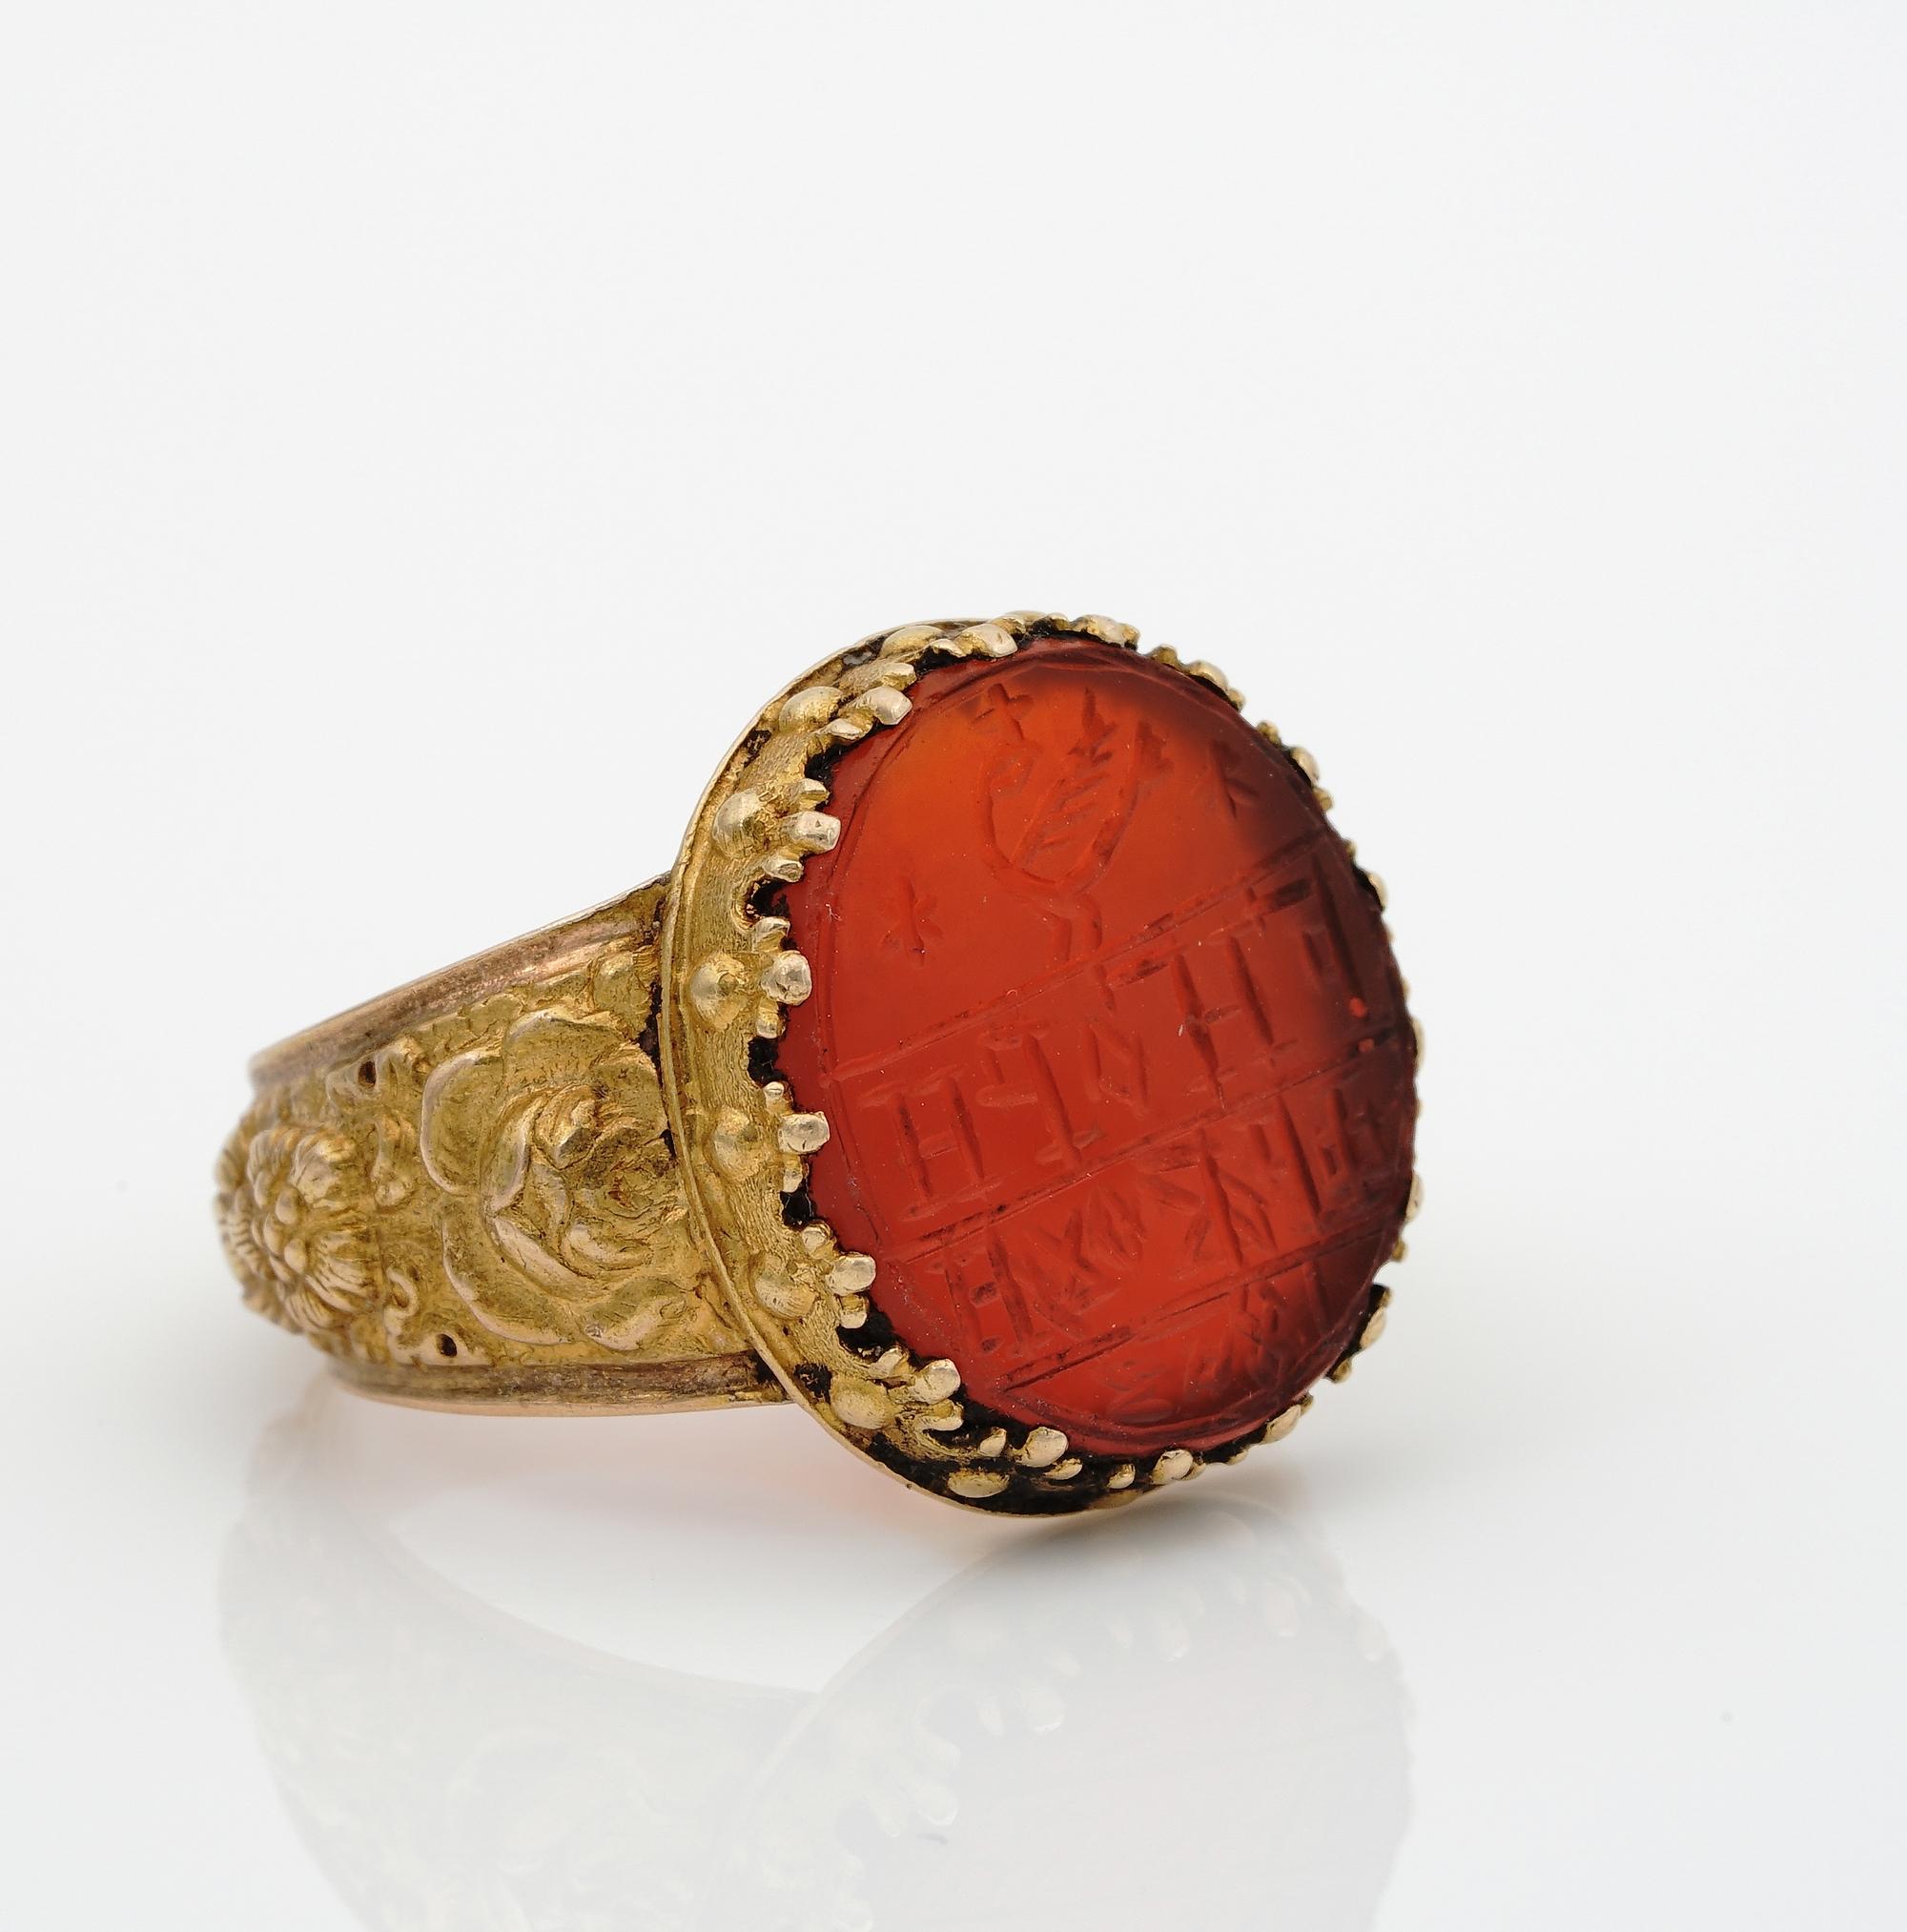 Sign of History

Magnificent Georgian period Signet ring suitable for either sex
Masterpiece in the whole, all intact, authentic 1803 as carved on the rare intaglio
Set with a Carnelian stone with carved a dove within two stars and inscription, with